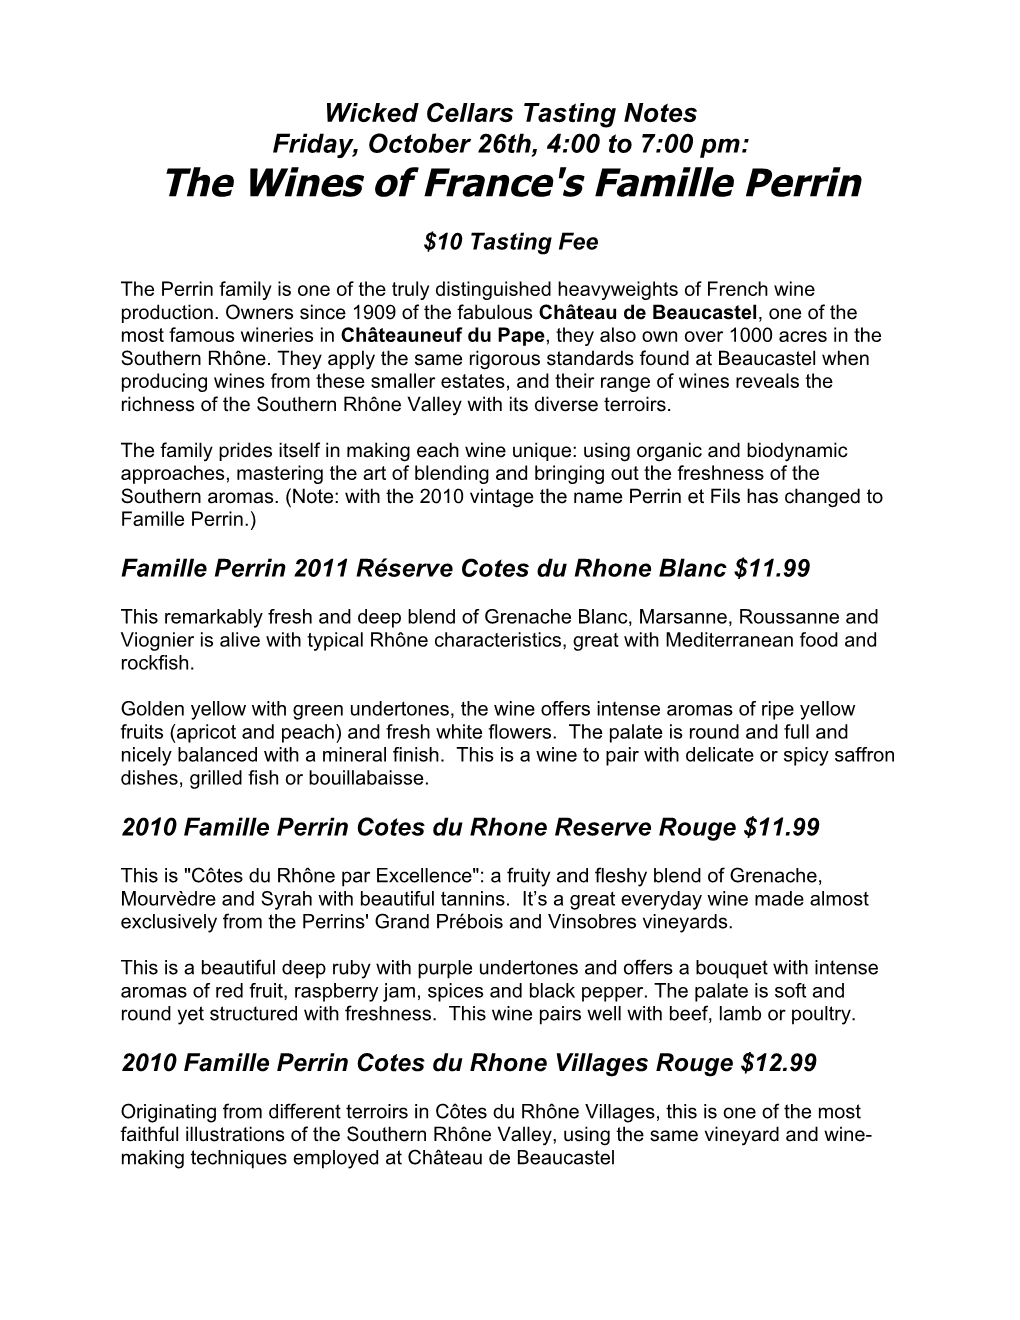 The Wines of France's Famille Perrin